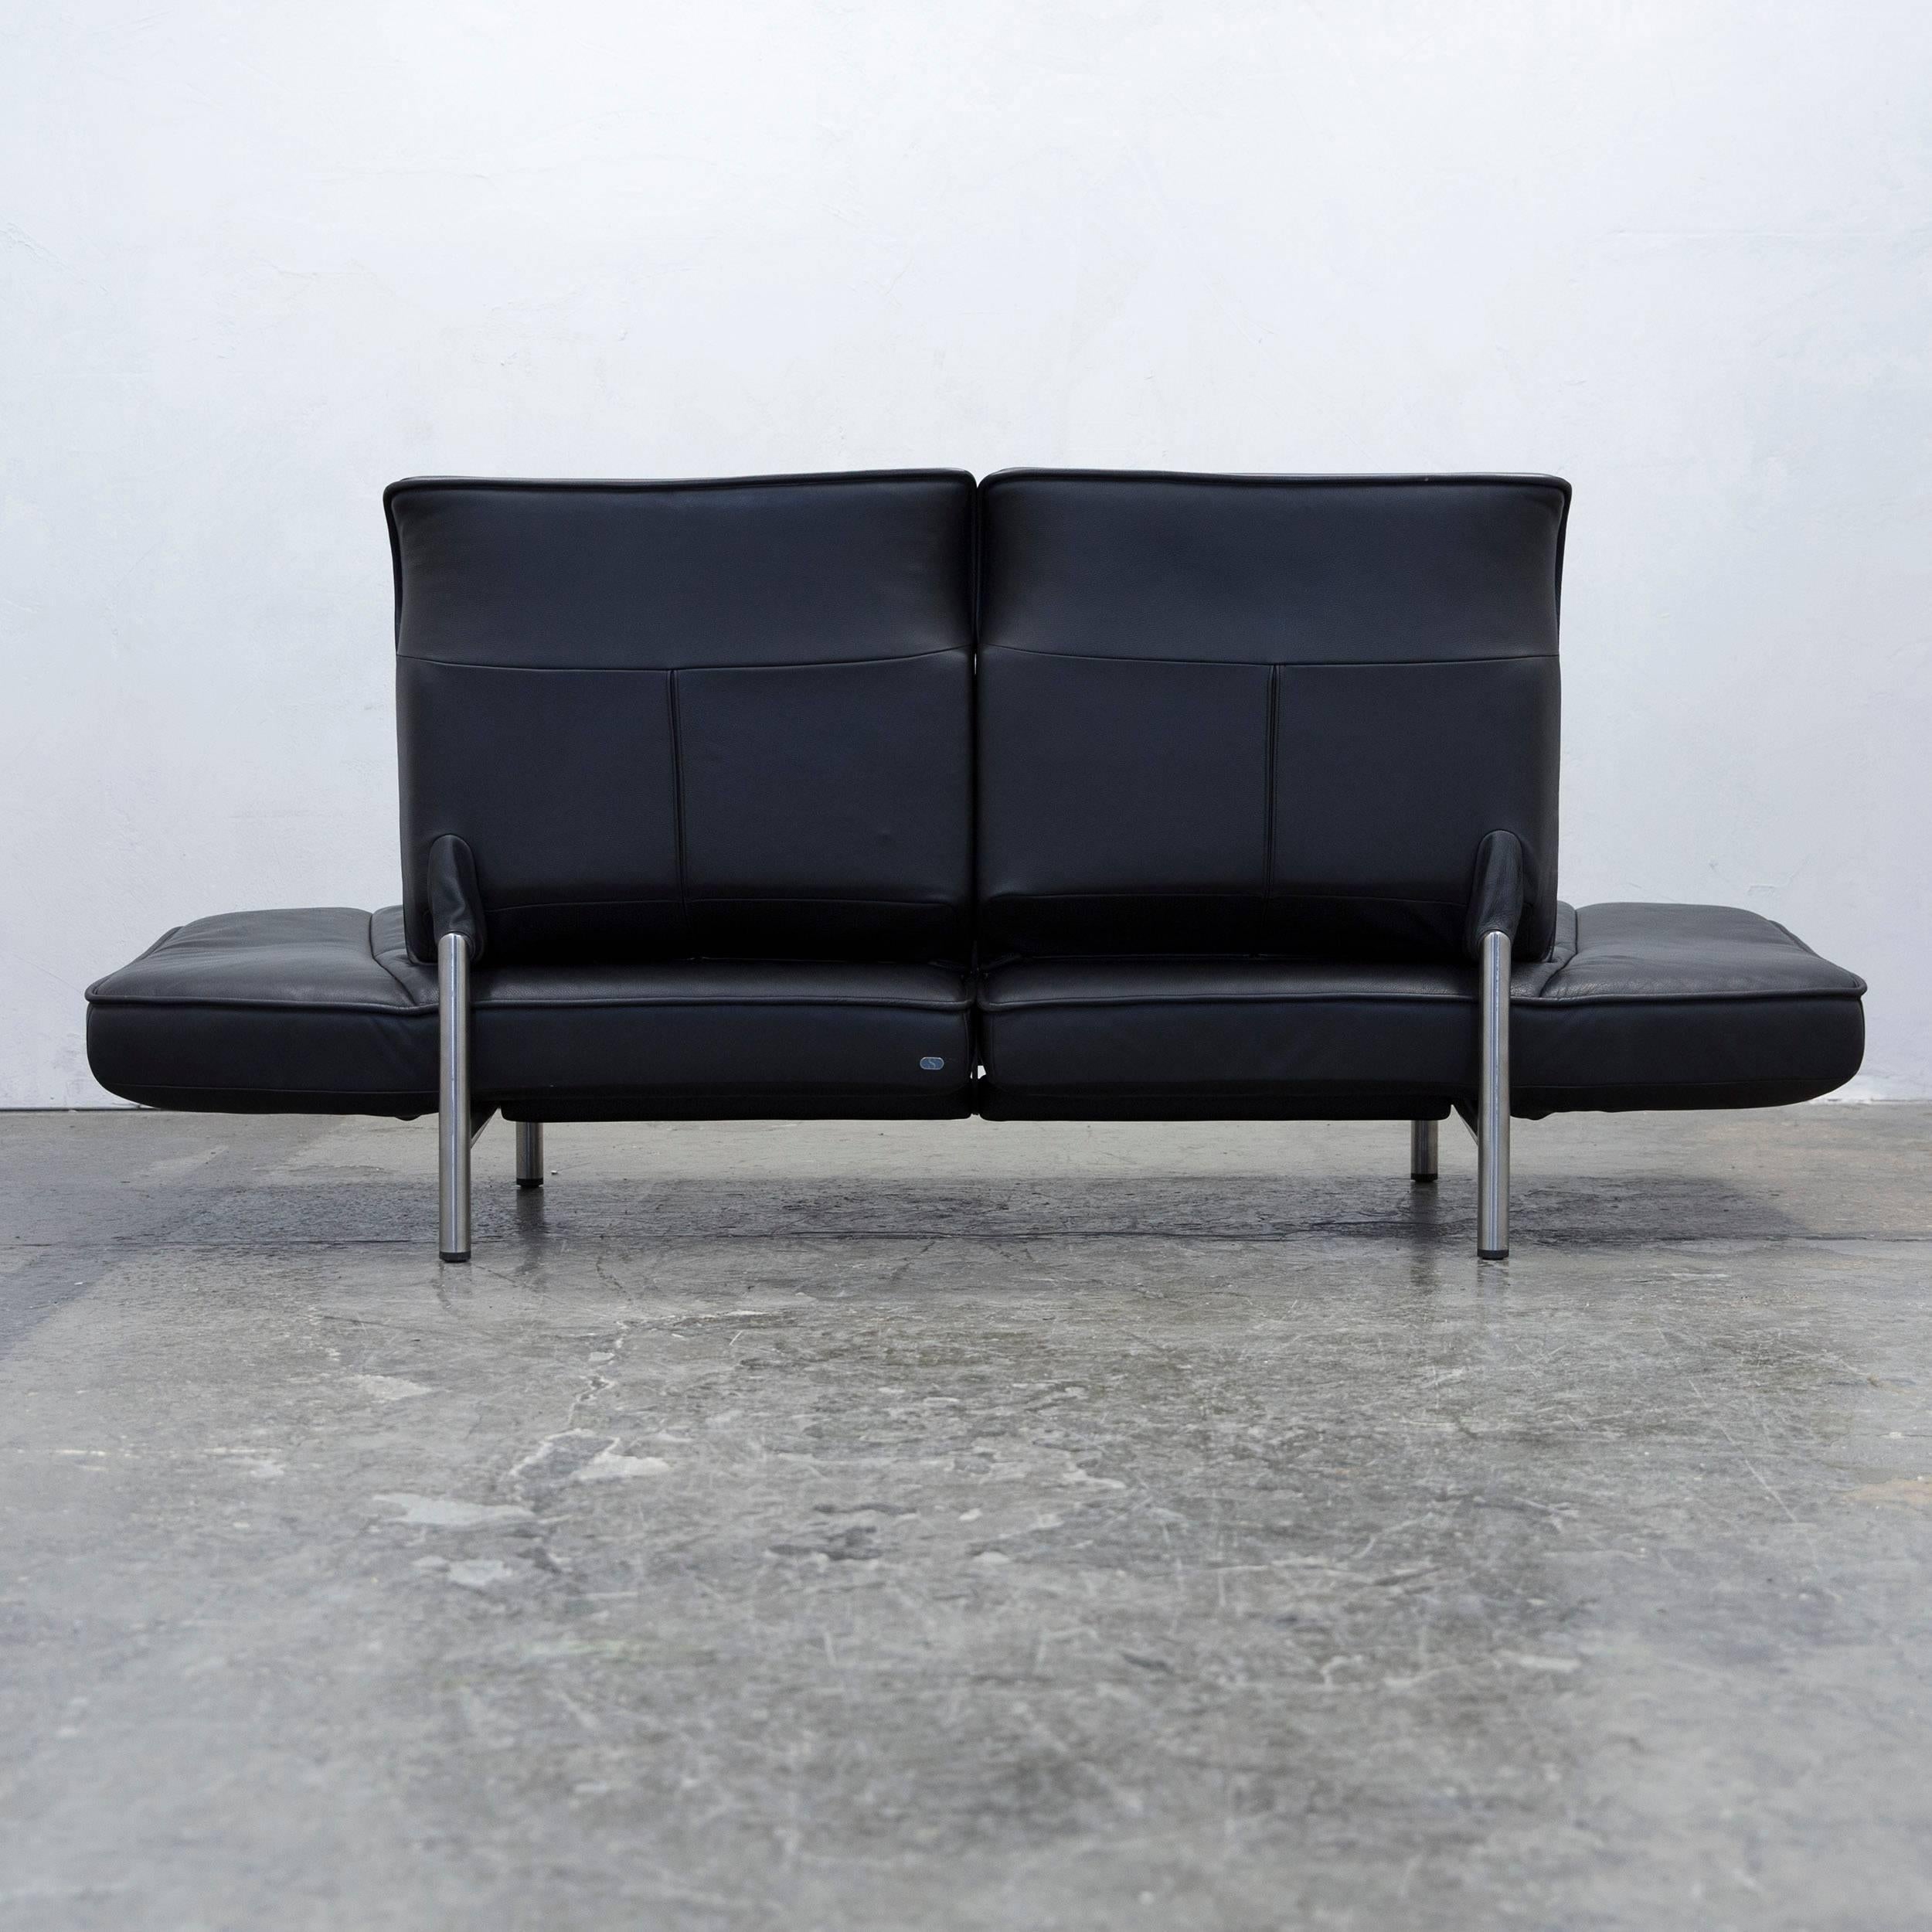 De Sede DS 450 Designer Leather Sofa Black Relax Function Two-seat Modern 4